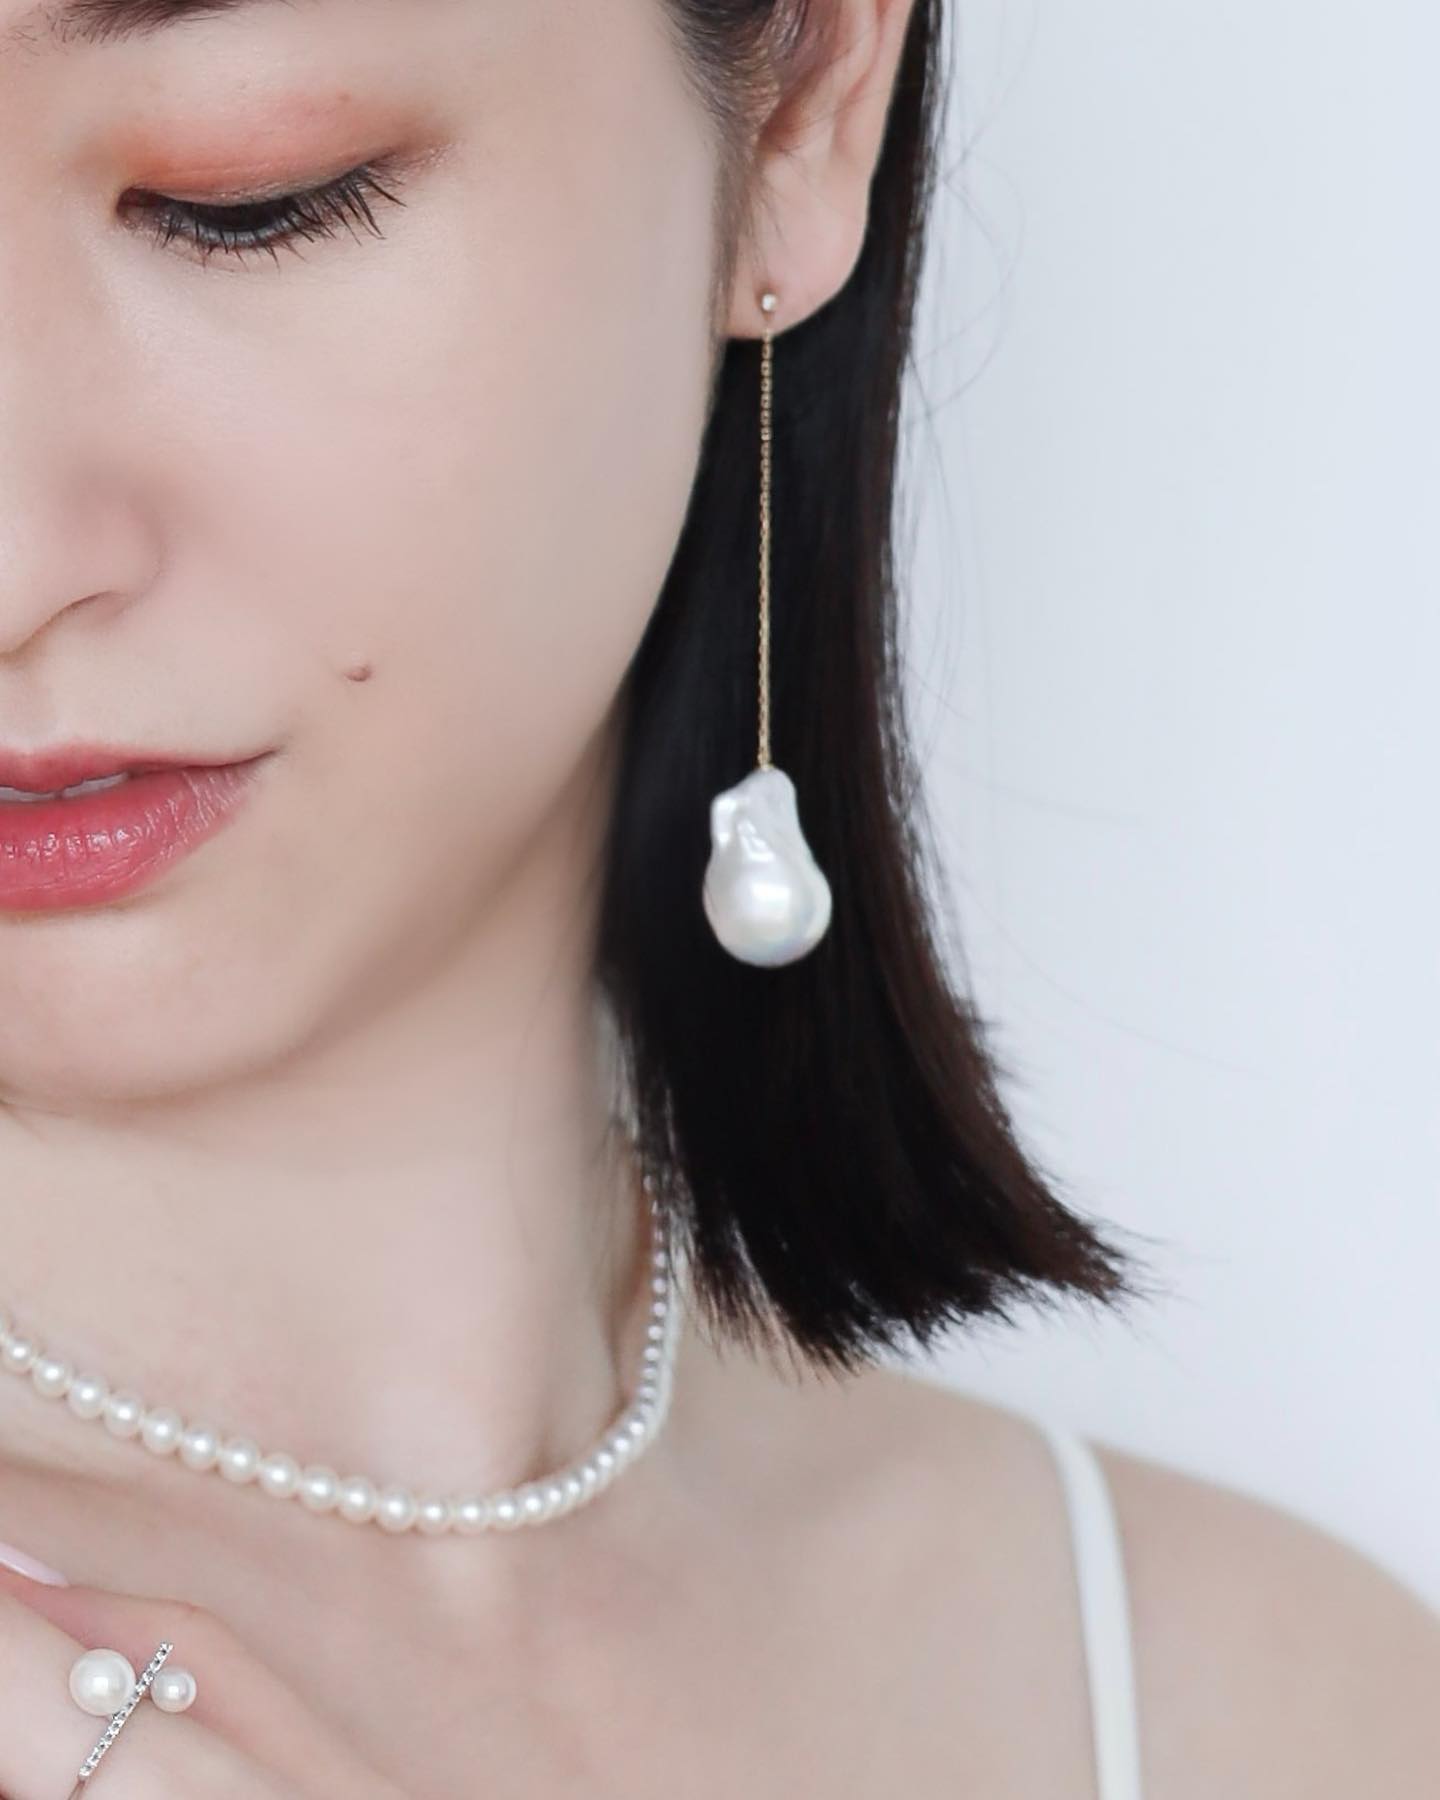 Half-faced asian woman wearing Baroque Pearl Swing Earrings paired with Akoya Baby Pearl Classic Necklace and Akoya Diamond Bar Ring on left index finger